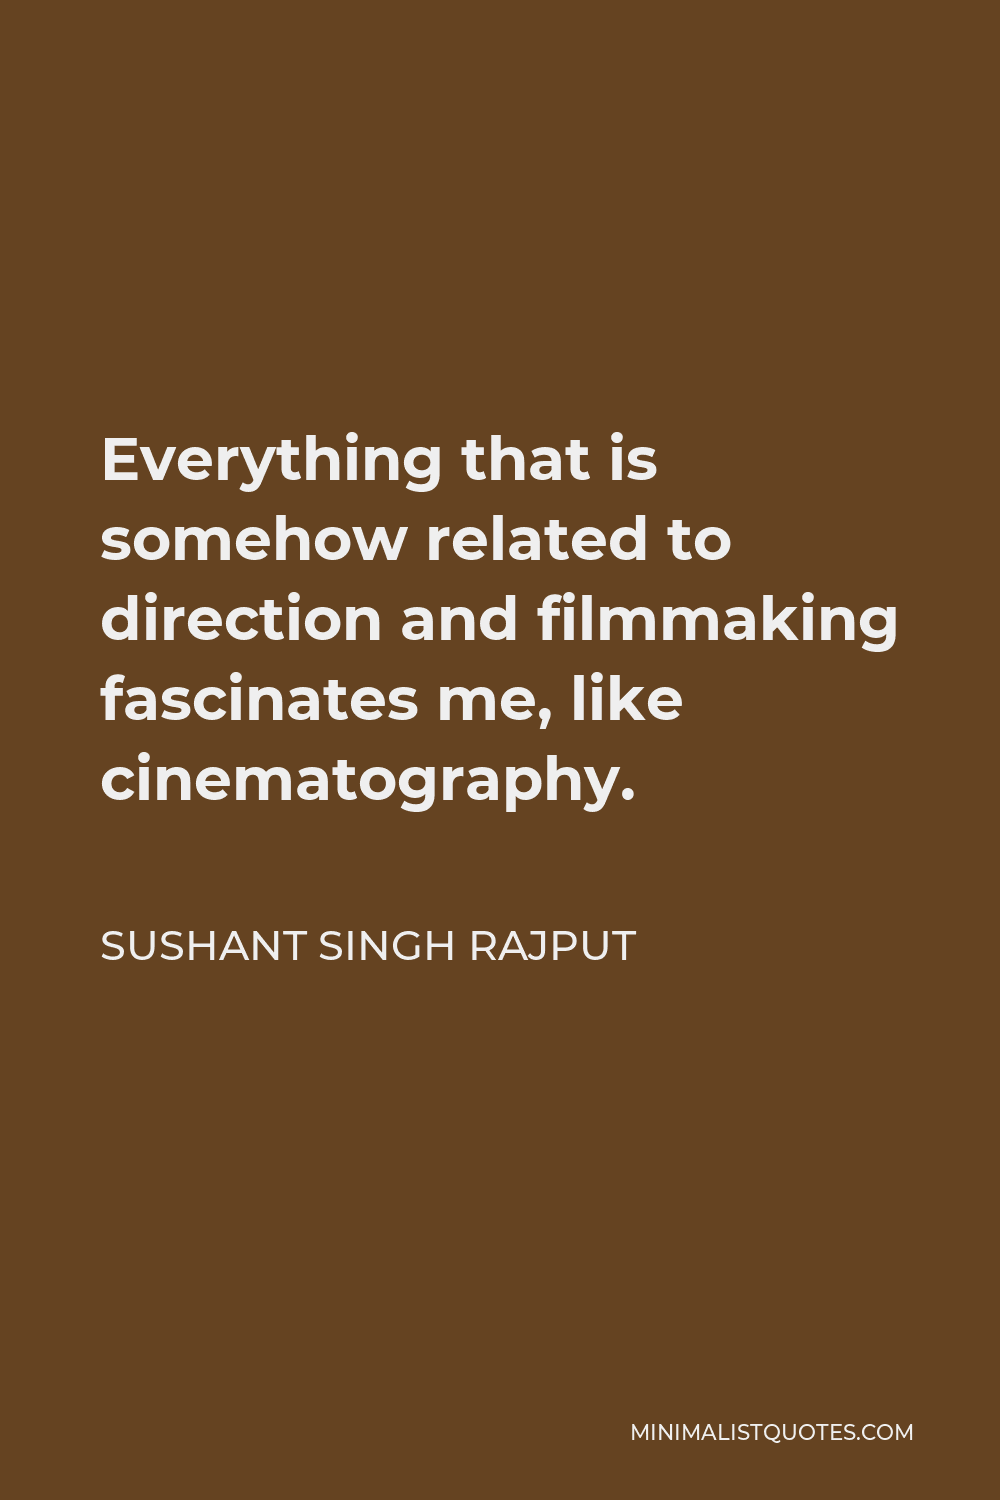 Sushant Singh Rajput Quote - Everything that is somehow related to direction and filmmaking fascinates me, like cinematography.